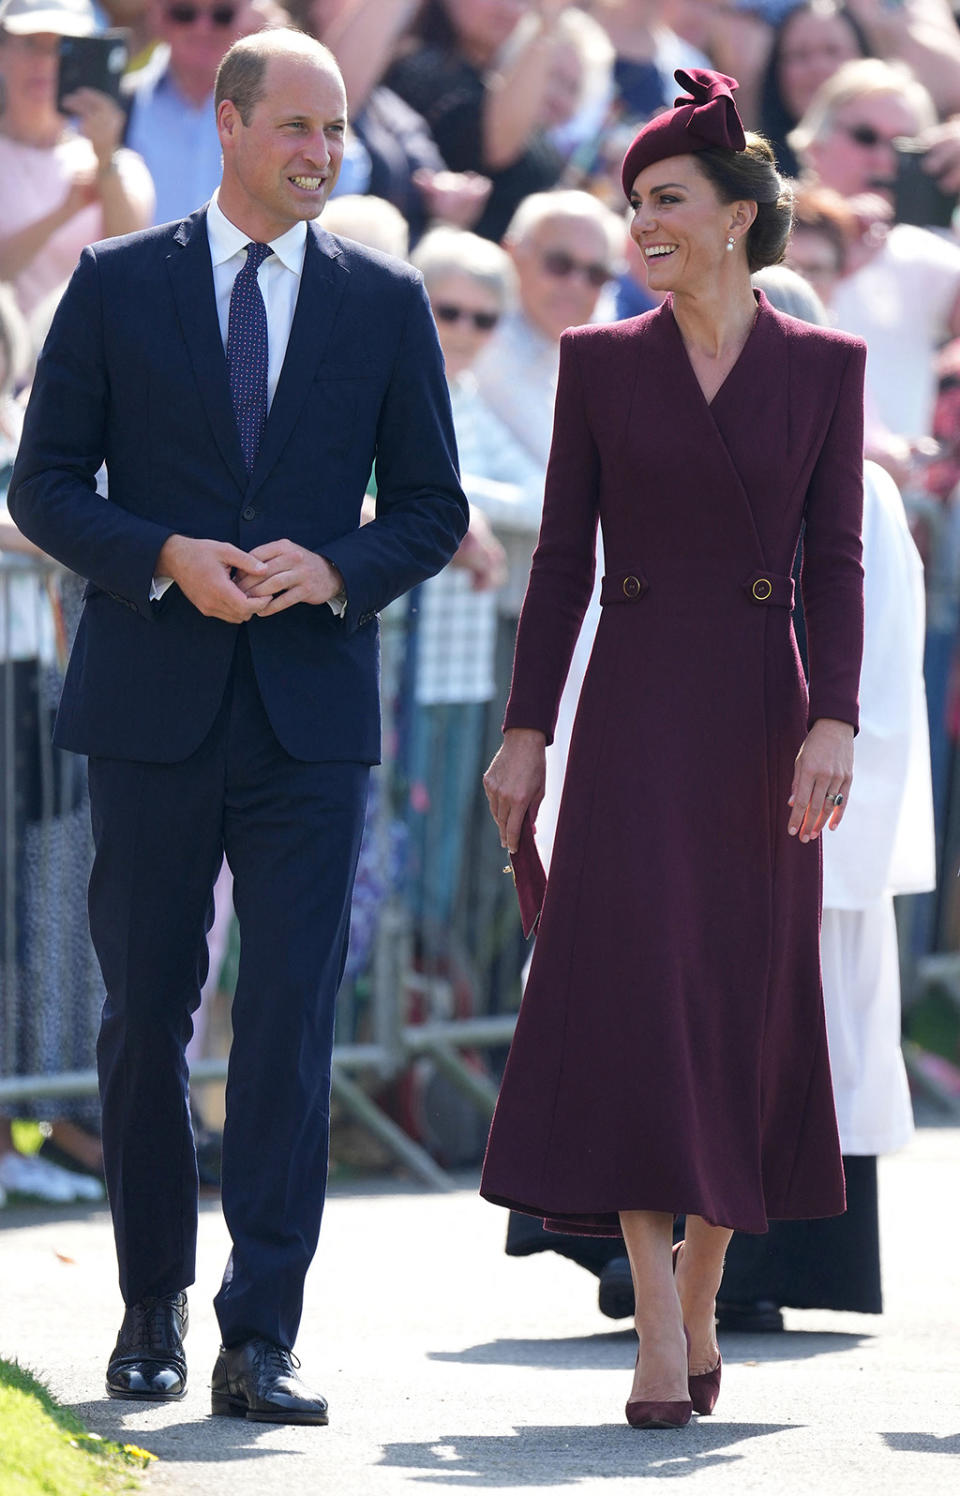 The Prince and Princess of Wales attend a service to commemorate the life of Her Late Majesty Queen Elizabeth II on the first anniversary of her passing at St Davids Cathedral, St Davids, Pembrokeshire, UK, on the 8th September 2023. 08 Sep 2023 Pictured: The Prince and Princess of Wales attend a service to commemorate the life of Her Late Majesty Queen Elizabeth II on the first anniversary of her passing at St Davids Cathedral, St Davids, Pembrokeshire, UK, on the 8th September 2023. Photo credit: James Whatling / MEGA TheMegaAgency.com +1 888 505 6342 (Mega Agency TagID: MEGA1028056_002.jpg) [Photo via Mega Agency]